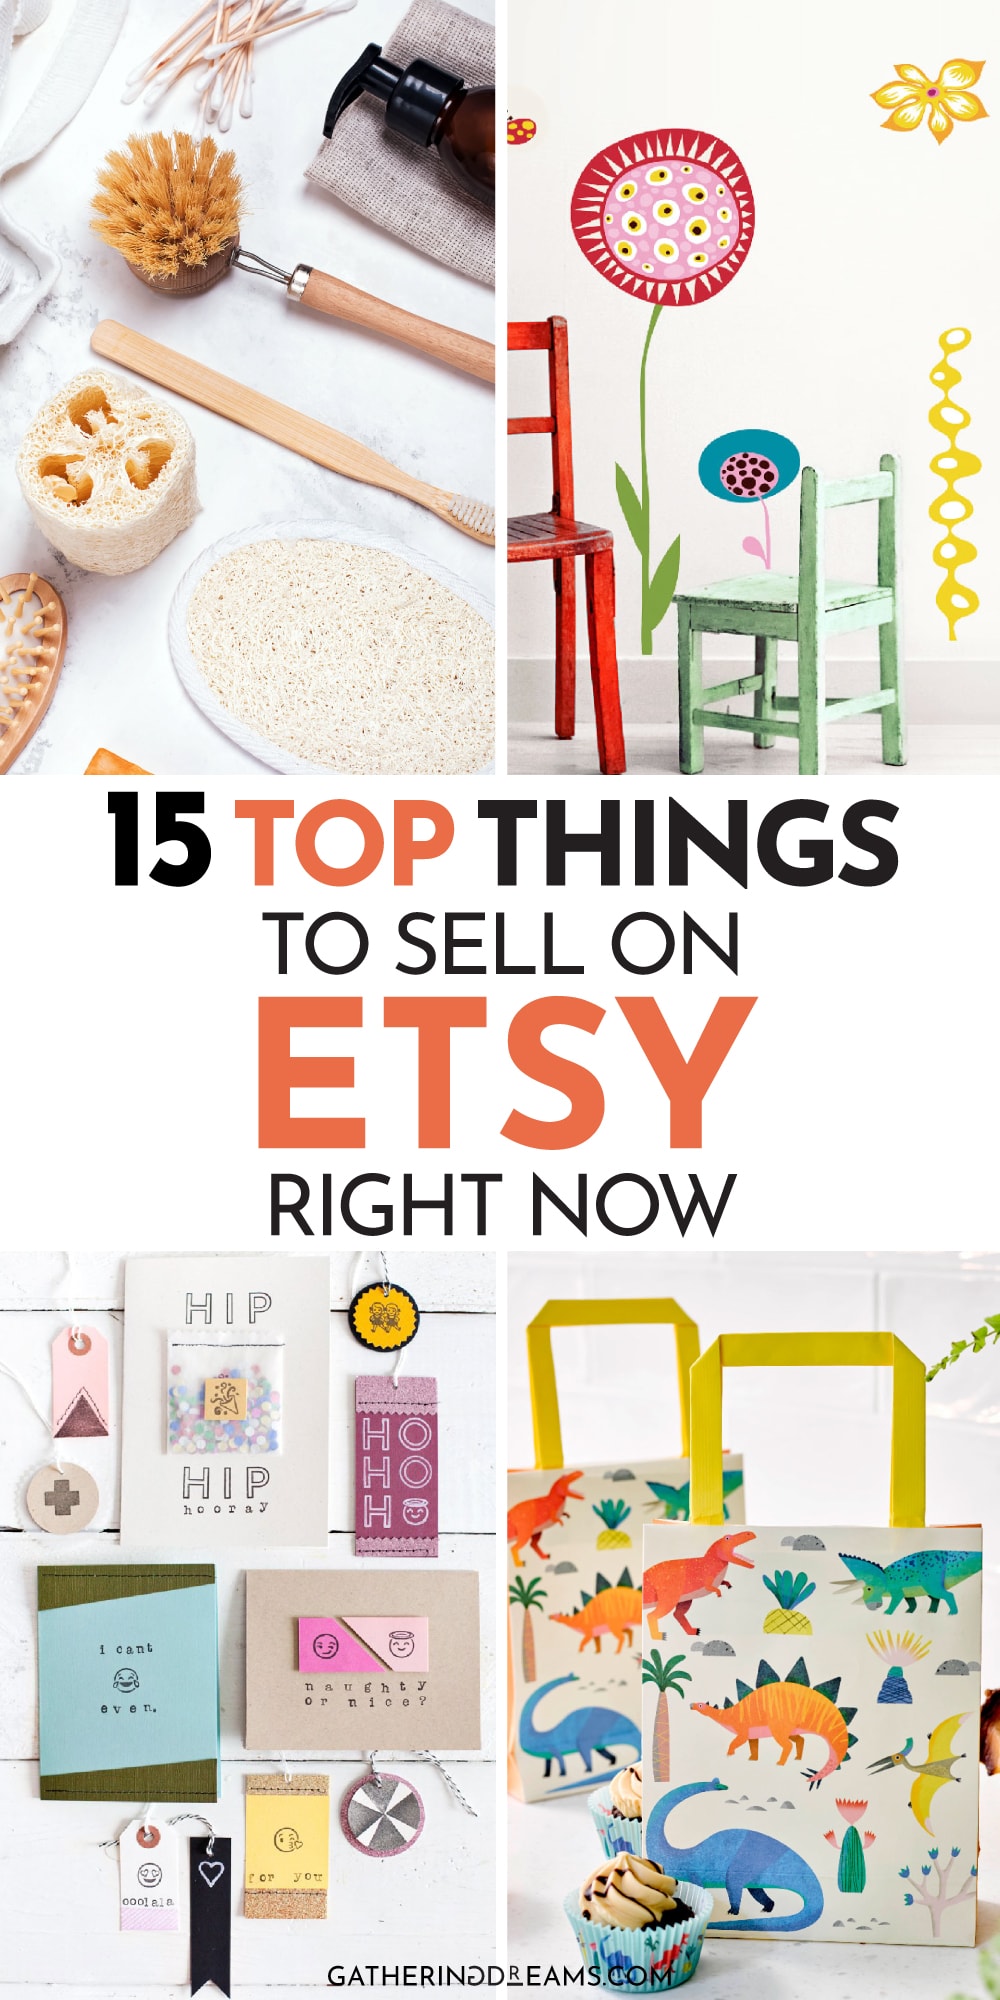 15 Best Things To Sell on Etsy For Money in 2022 - Gathering Dreams